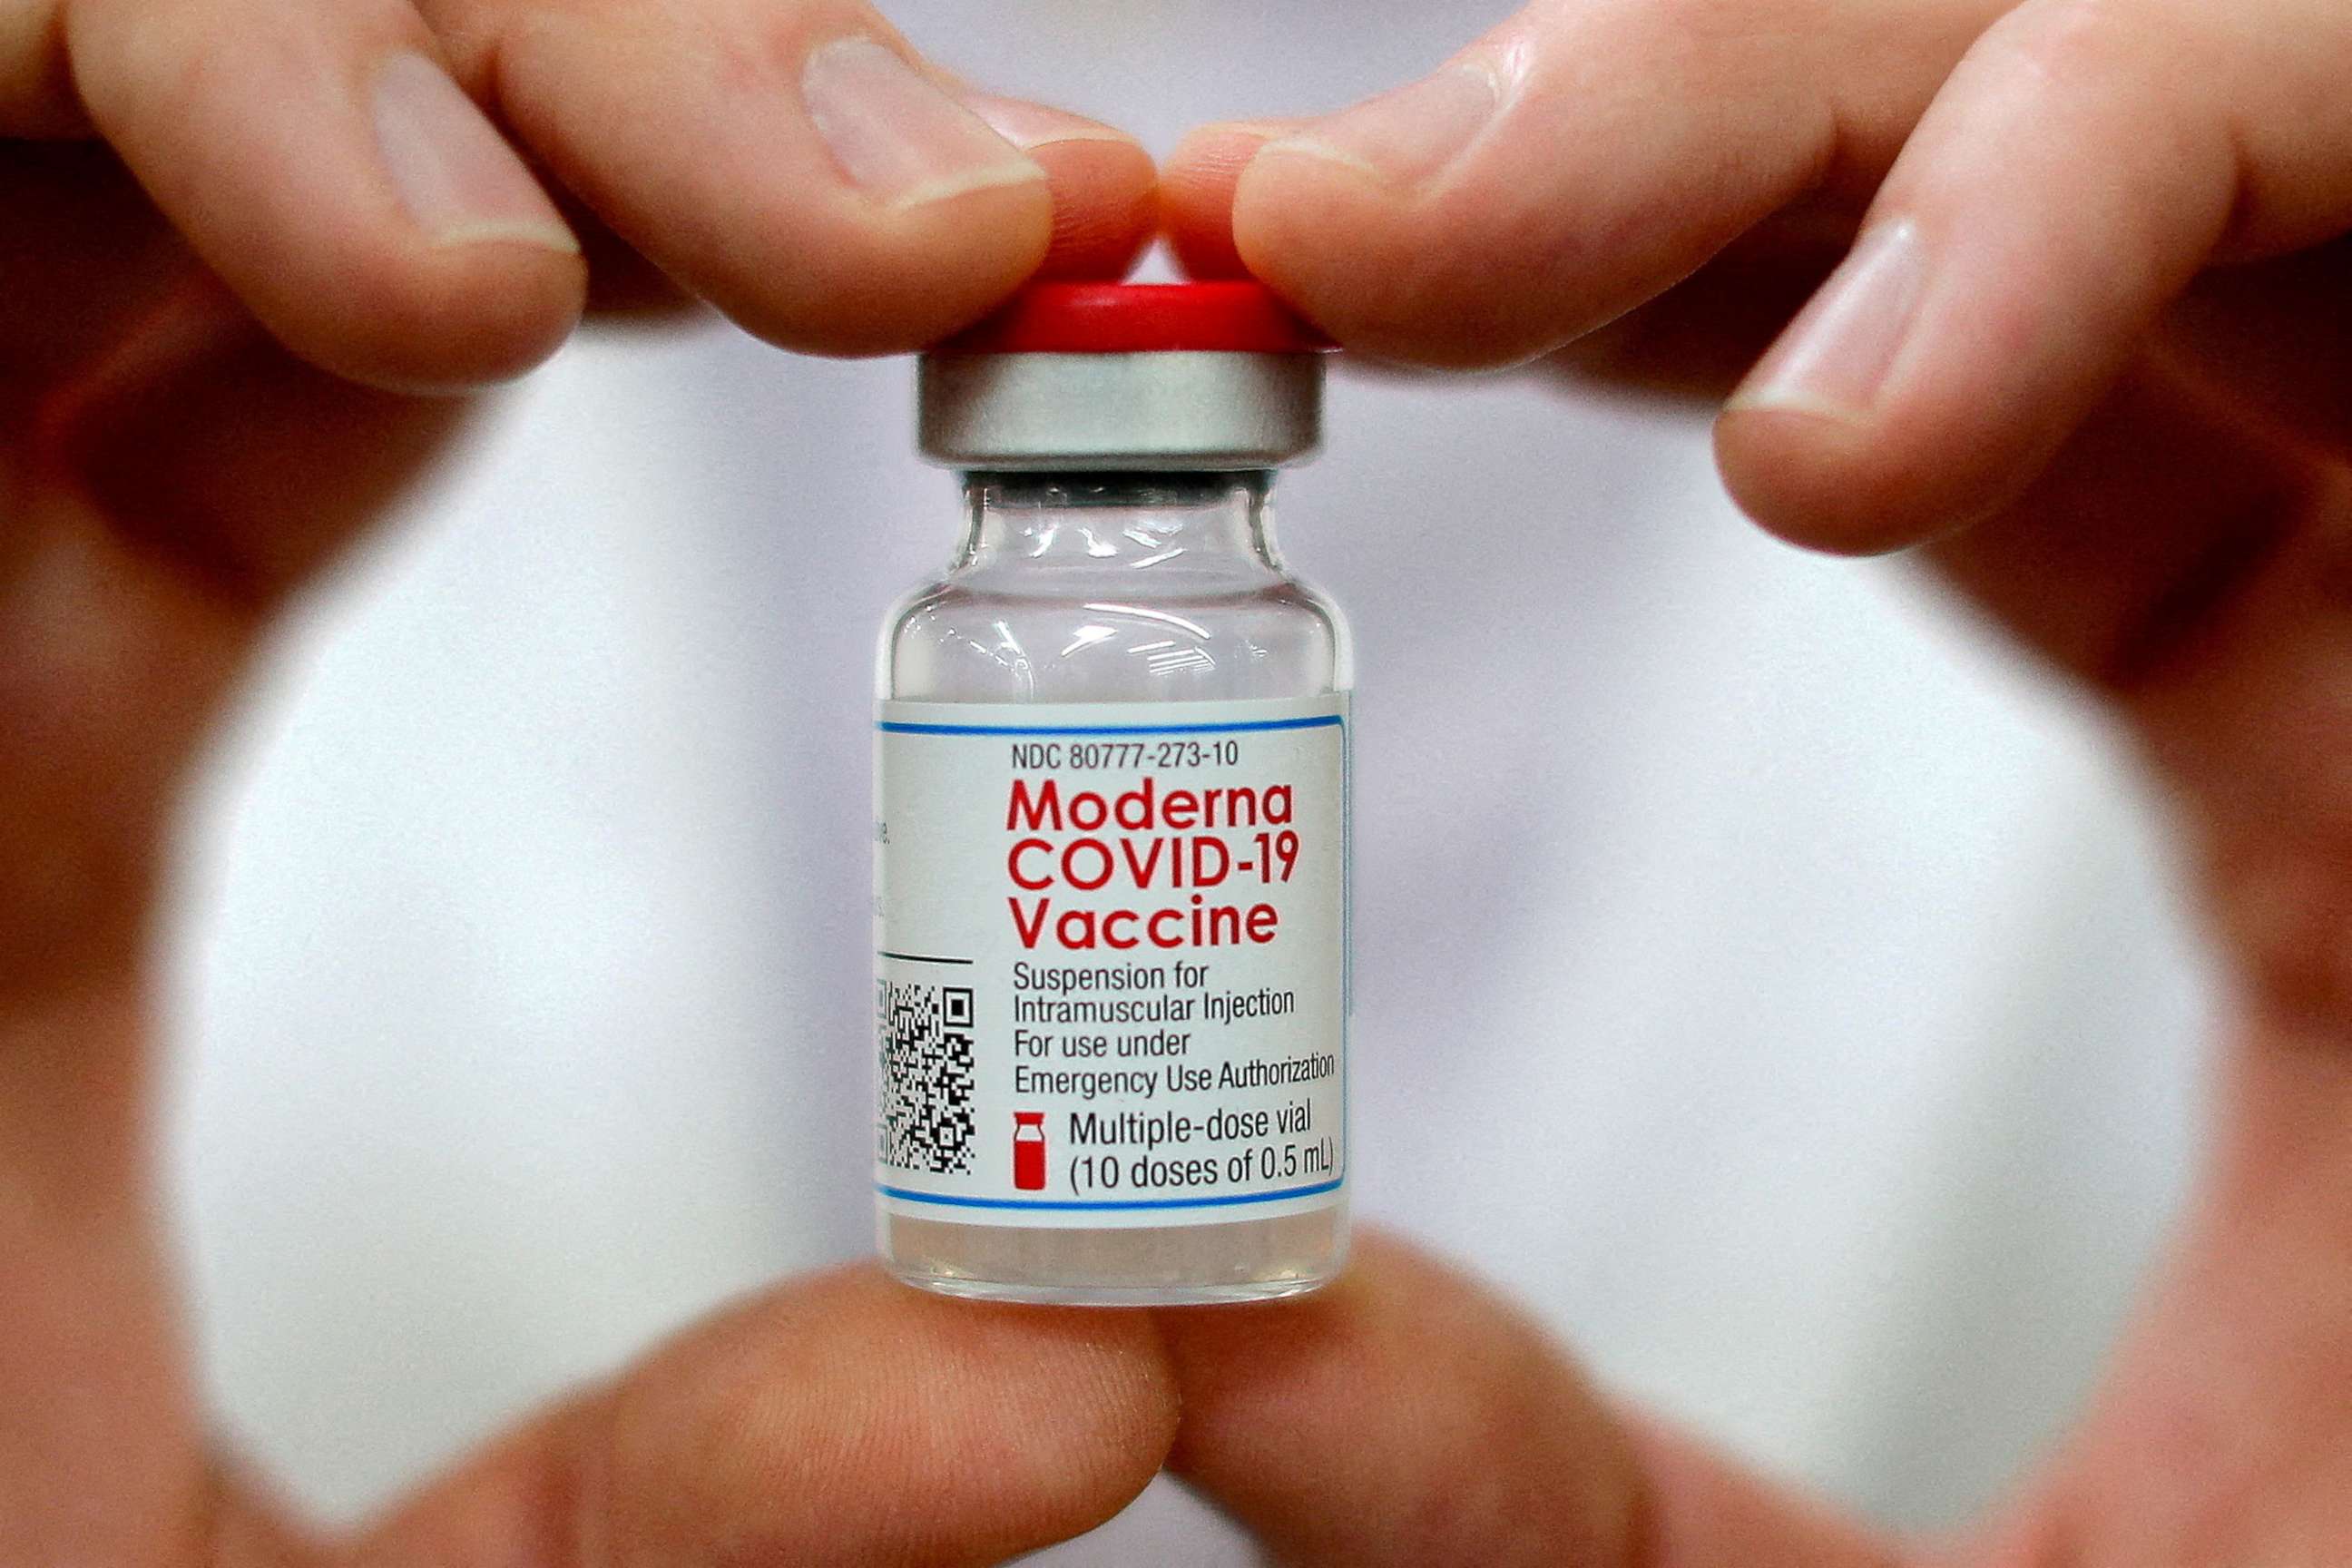 PHOTO: A pharmacist holds a vial of the Moderna COVID-19 vaccine in West Haven, Conn., Feb. 17, 2021.